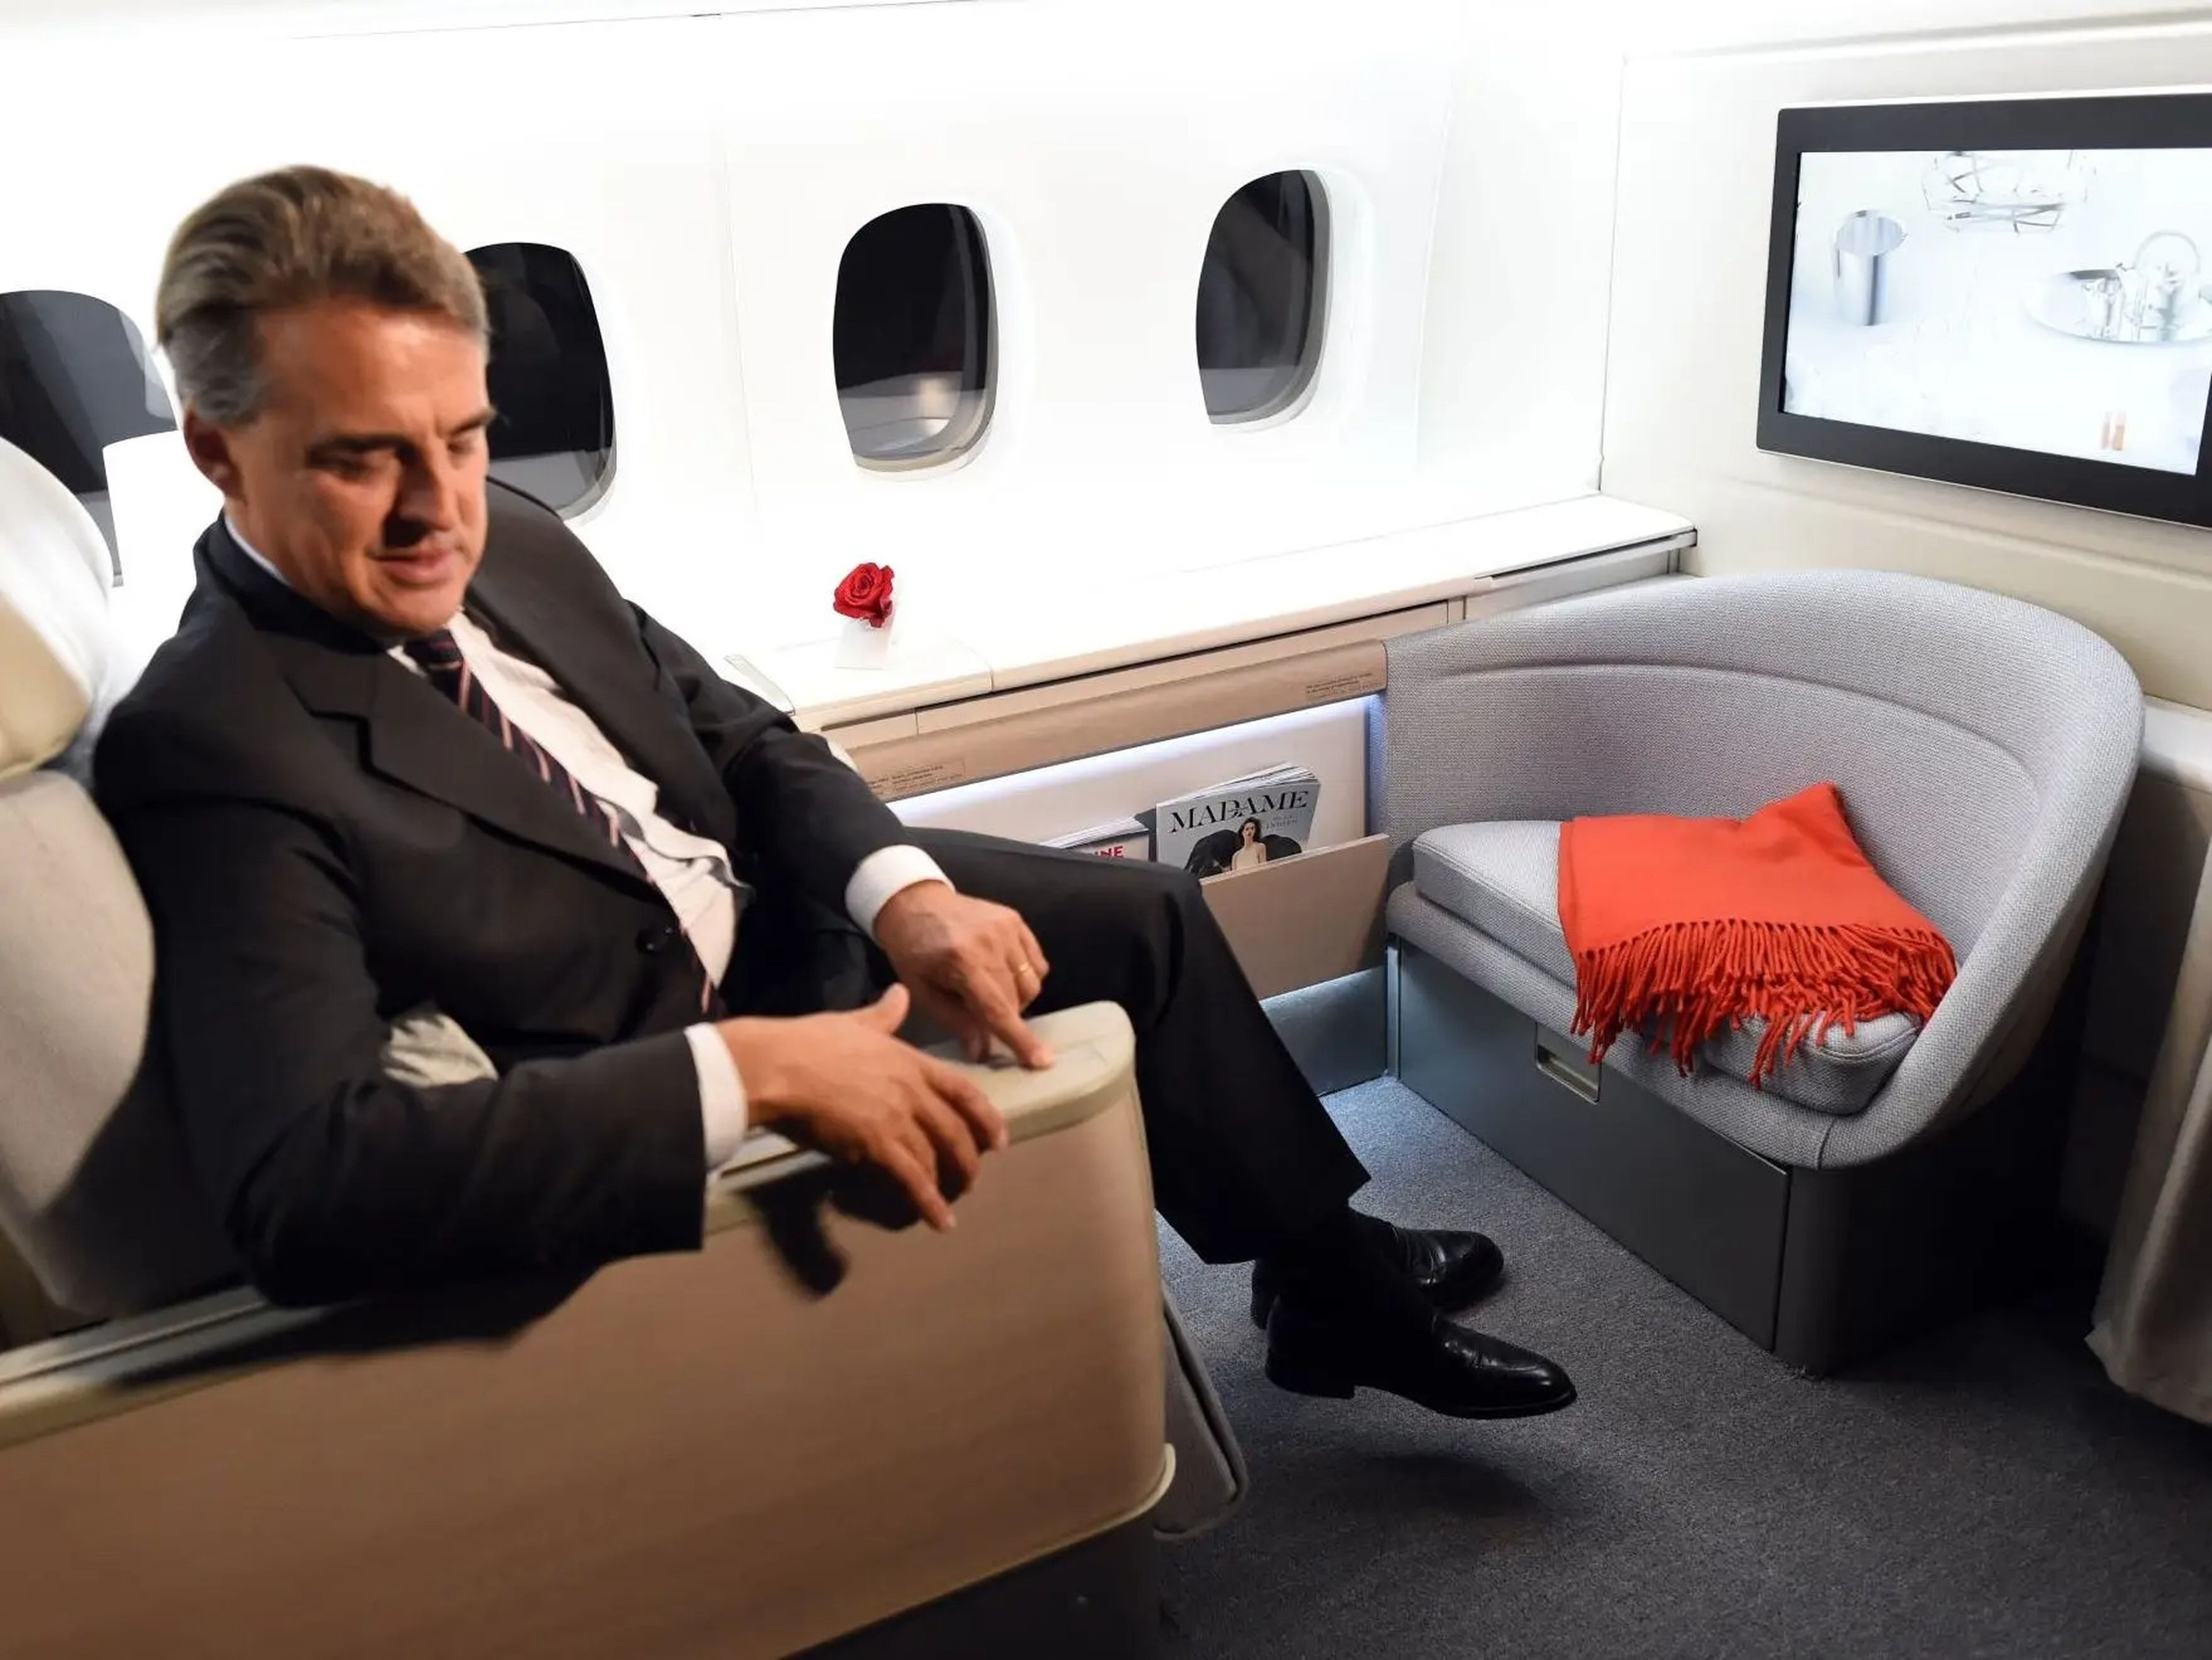 Air France CEO demonstrating the seat at the Paris Air Show in 2014.